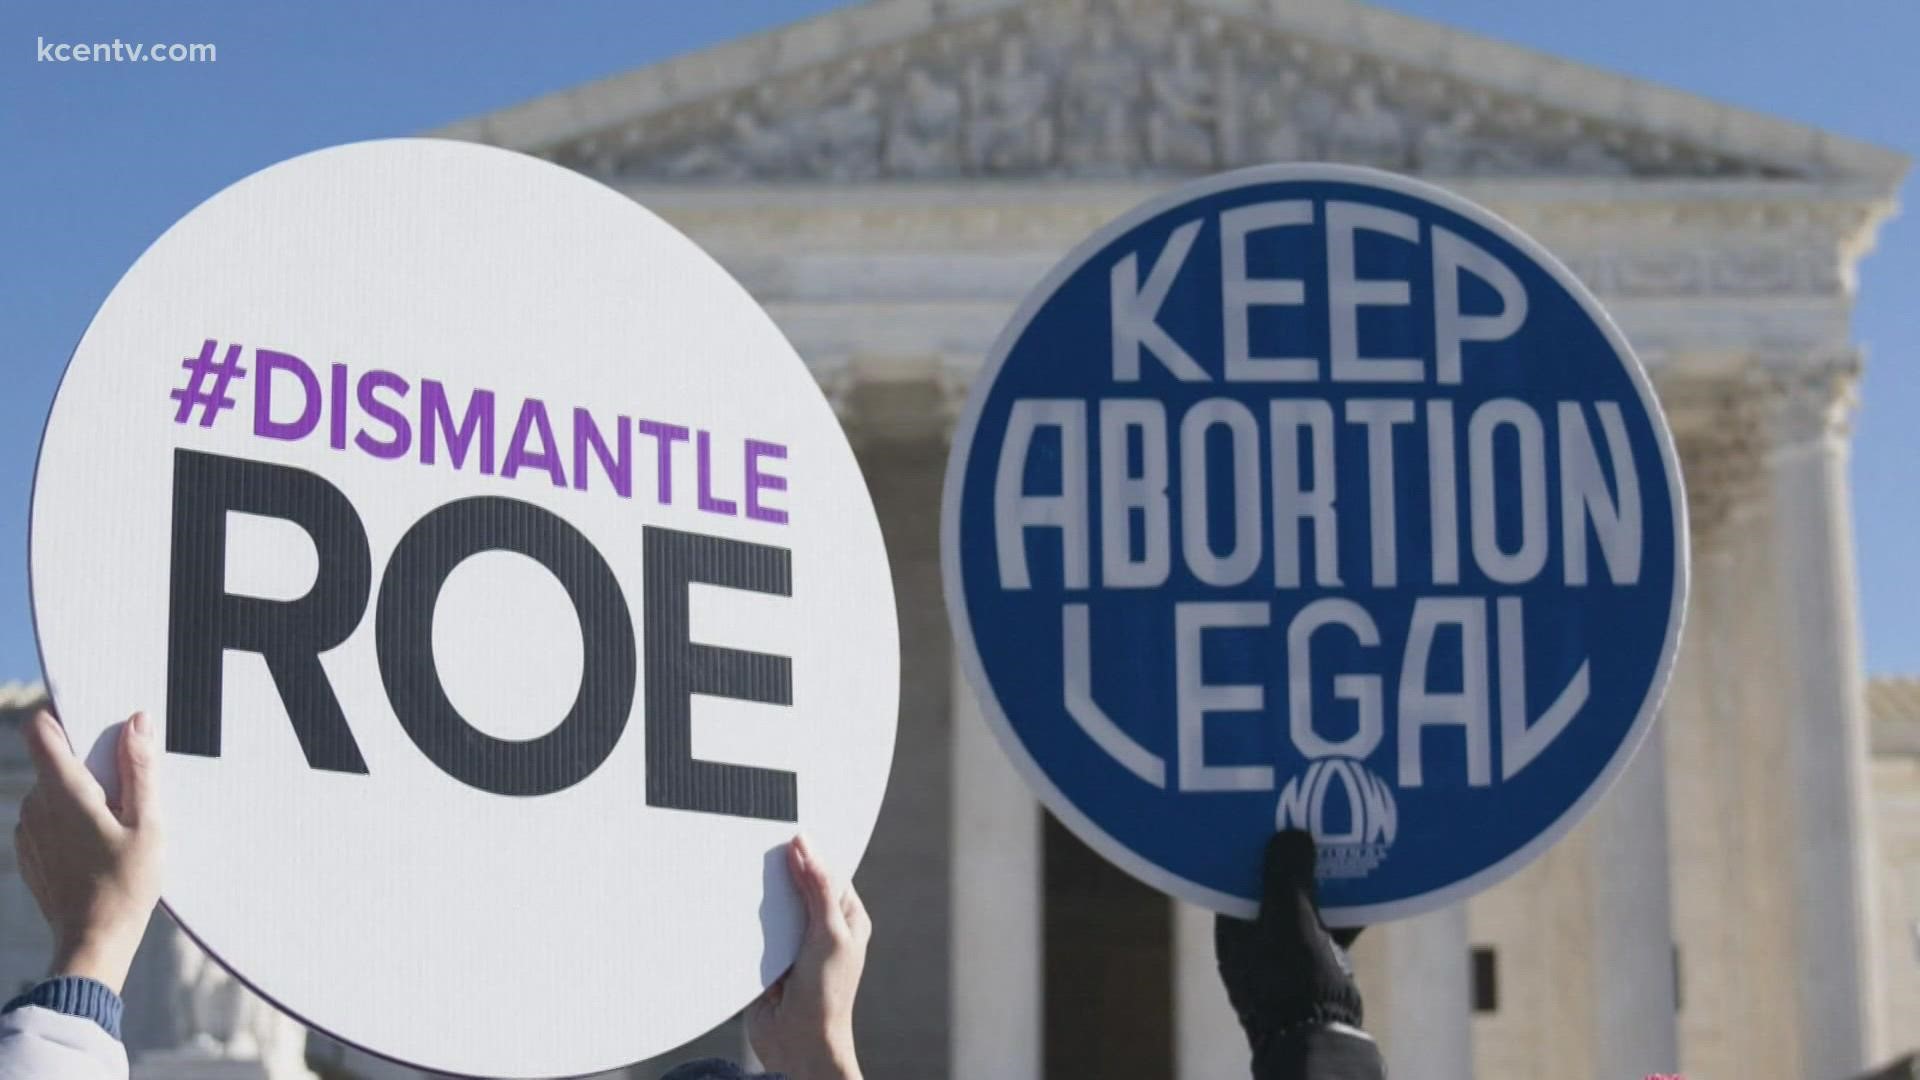 Senate's Majority Leader, Chuck Schumer announced that the Senate will vote to codify the right to seek an abortion into federal law.